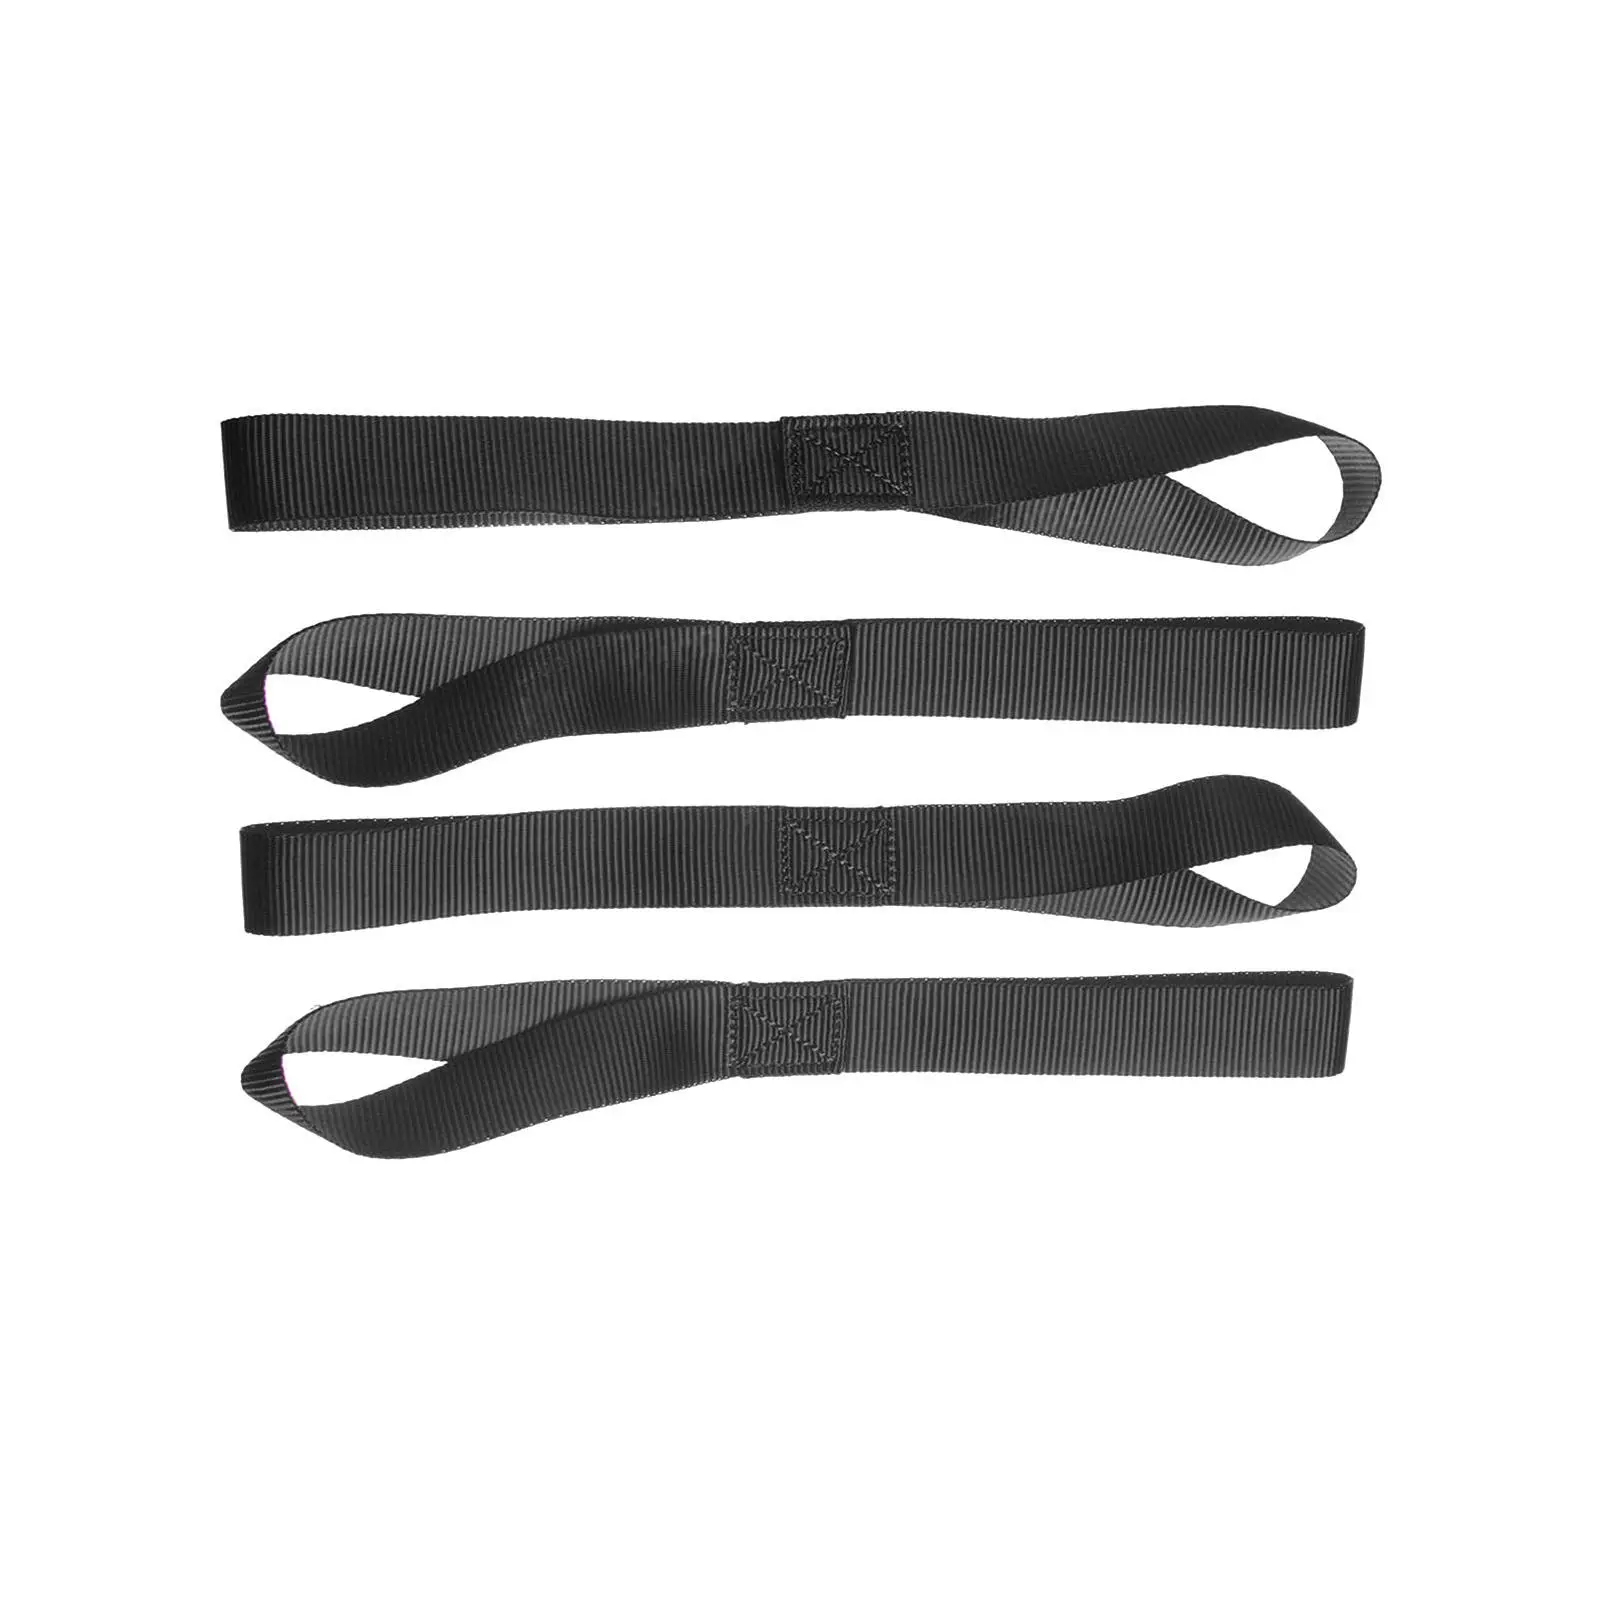 5 Pieces Soft Loop Vehicle Moving Nylon High Strength Truck Boat Garden Owing Cargo Tie-down Loops Tie Downs Tie Down Straps